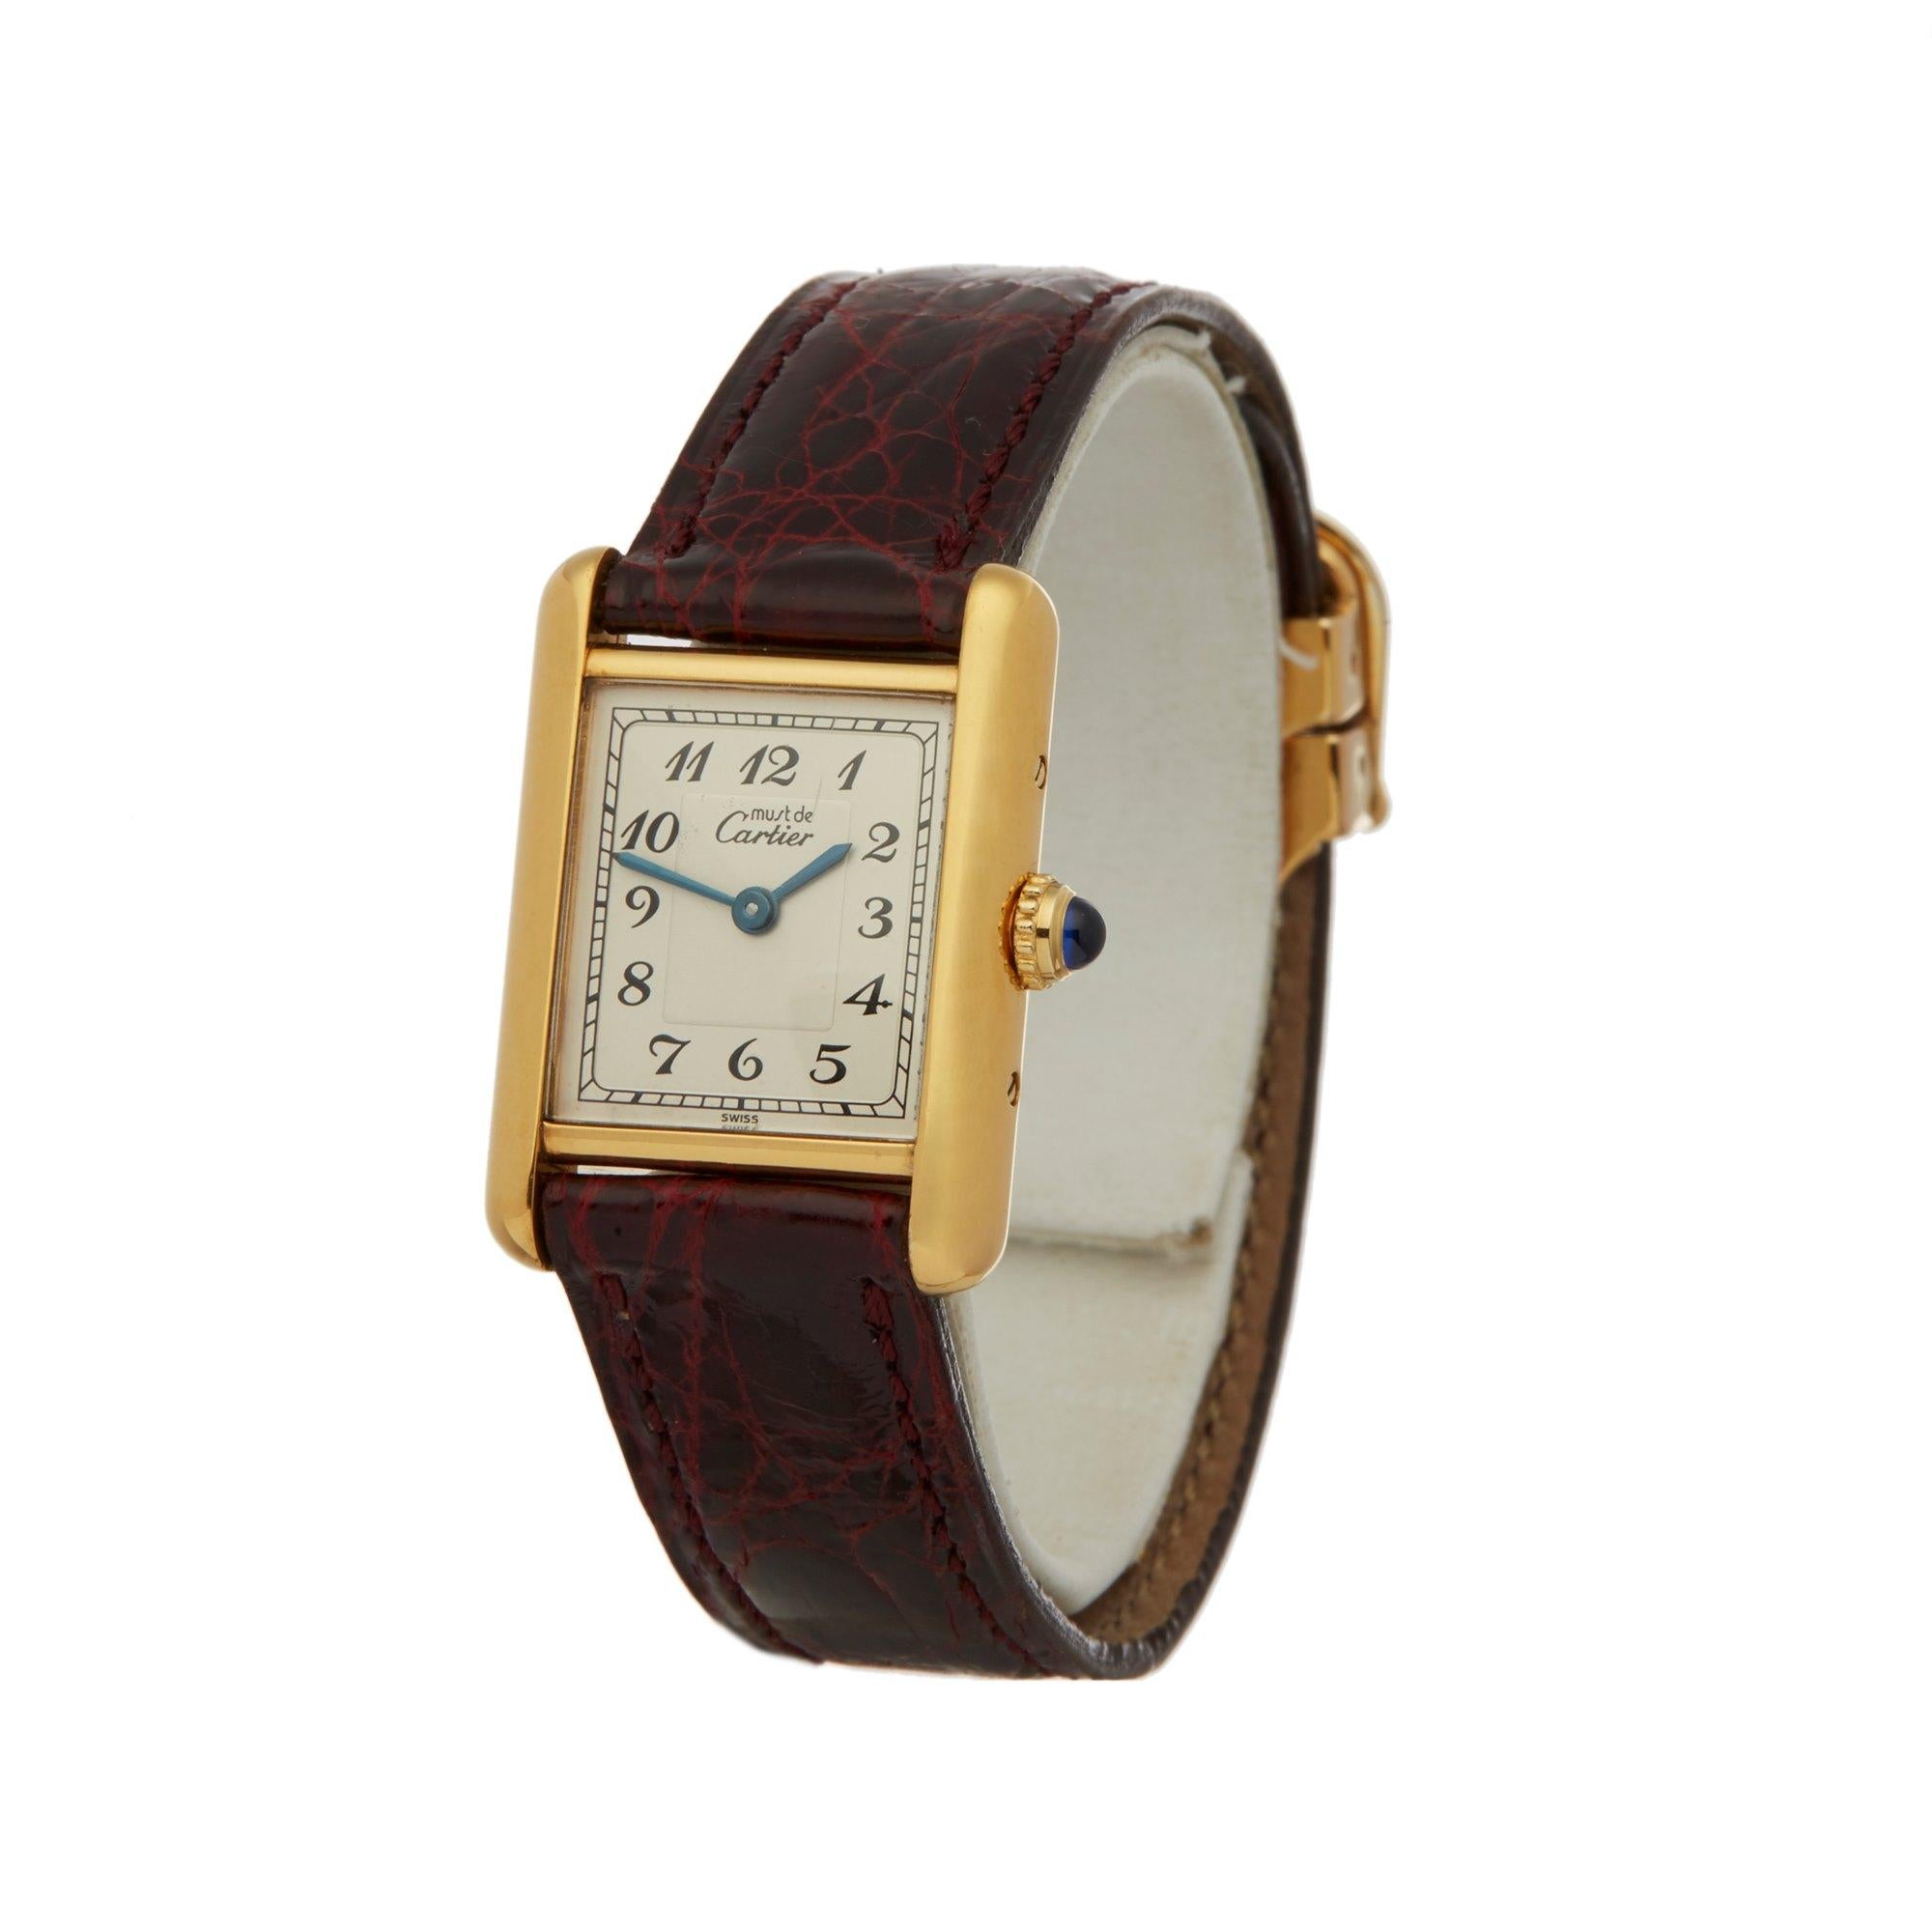 Xupes Reference: W007154
Manufacturer: Cartier
Model: Must de Cartier
Model Variant: Tank
Model Number: 
Age:  Circa 1990's
Gender: Ladies
Complete With: Xupes Presentation Box
Dial: White Arabic
Glass: Sapphire Crystal
Case Size: 20.5mm By